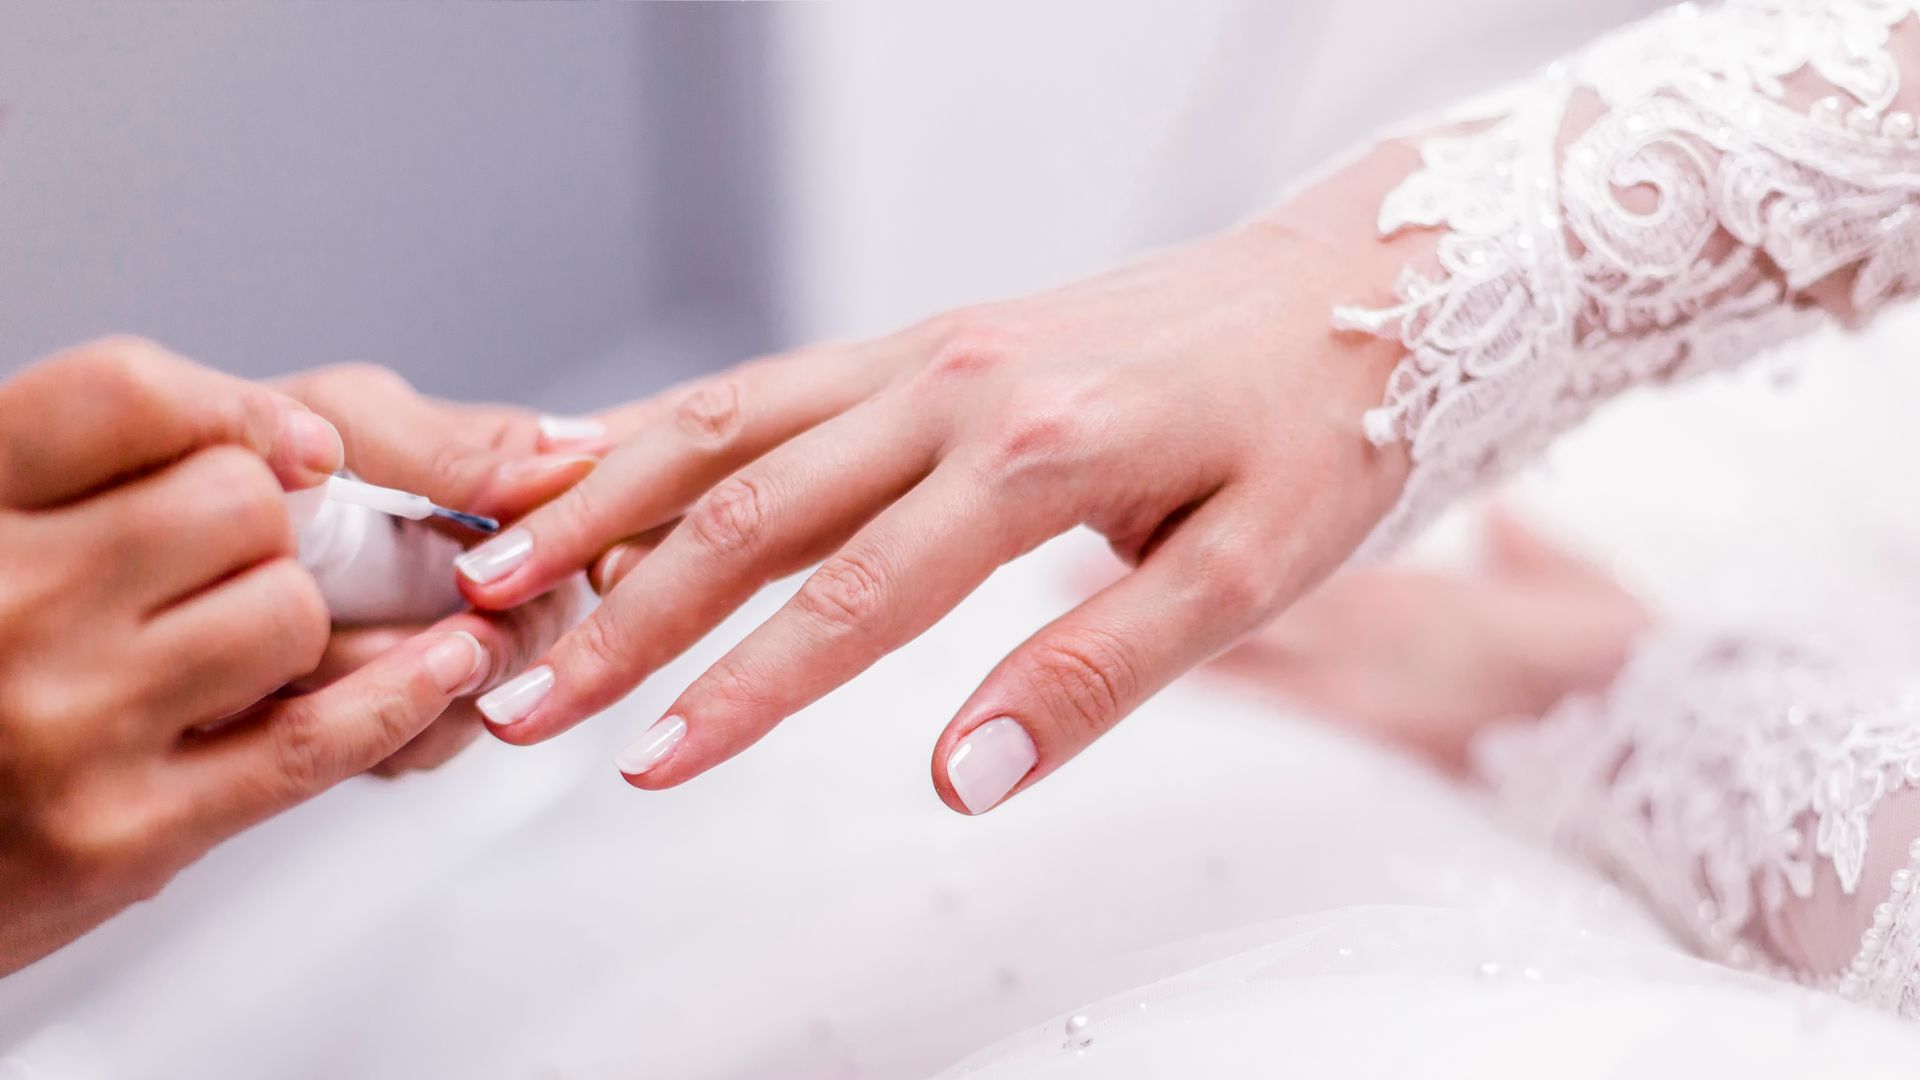 Bride having her nails painted